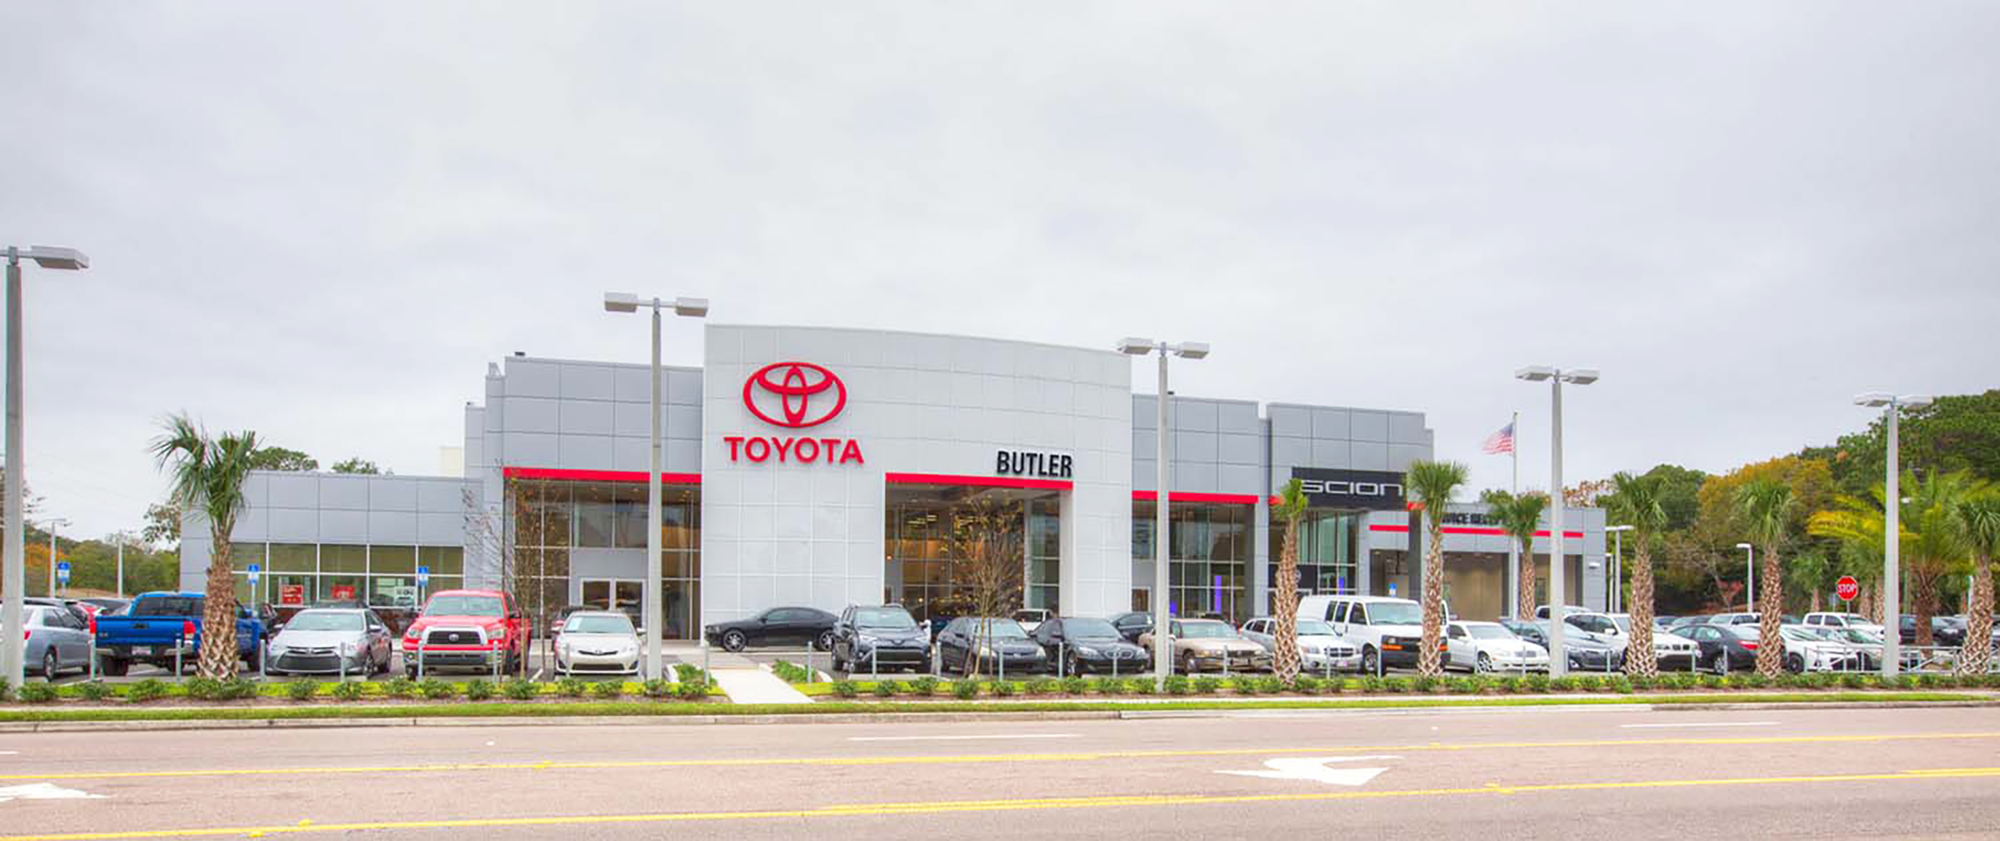 Ernie Palmer Toyota is now Butler Toyota at 1290 Cassat Ave. in West Jacksonville.